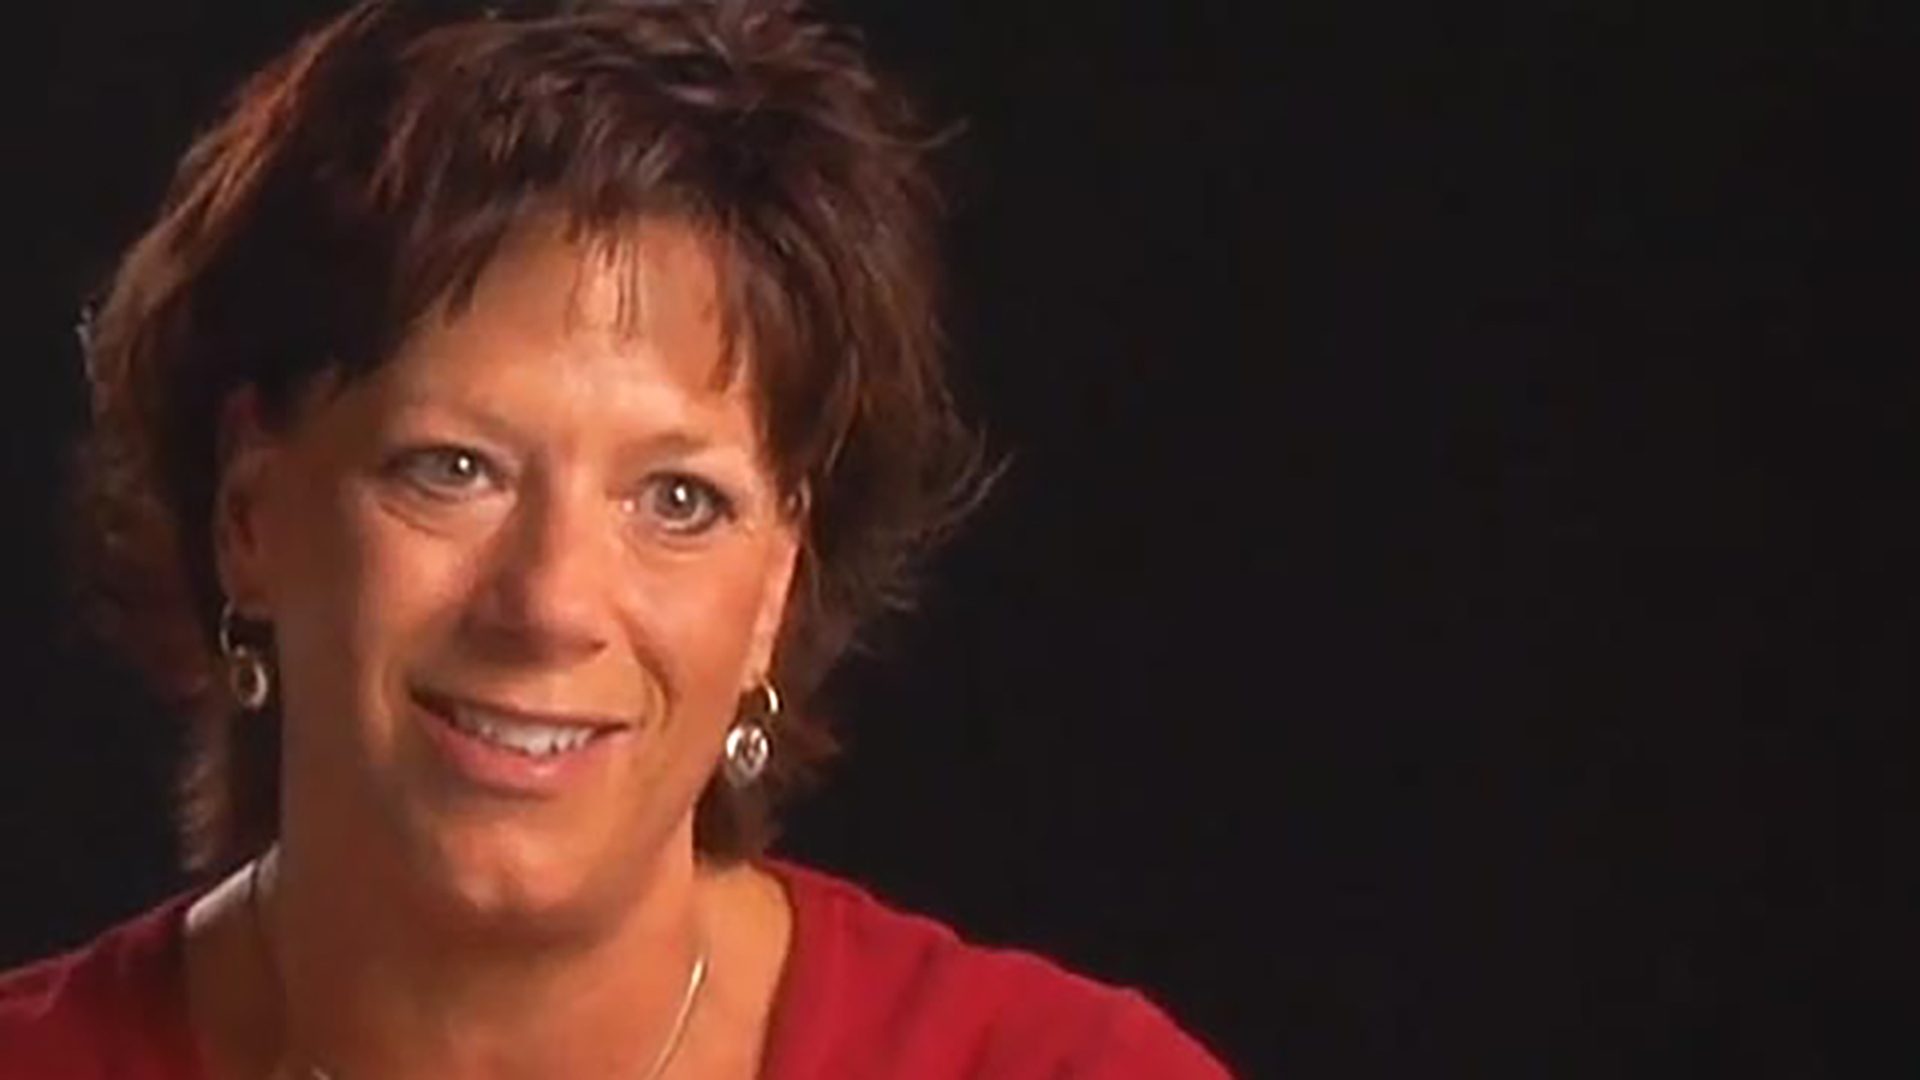 A middle-aged woman with short hear wears a red shirt and is interviewed against a black background.